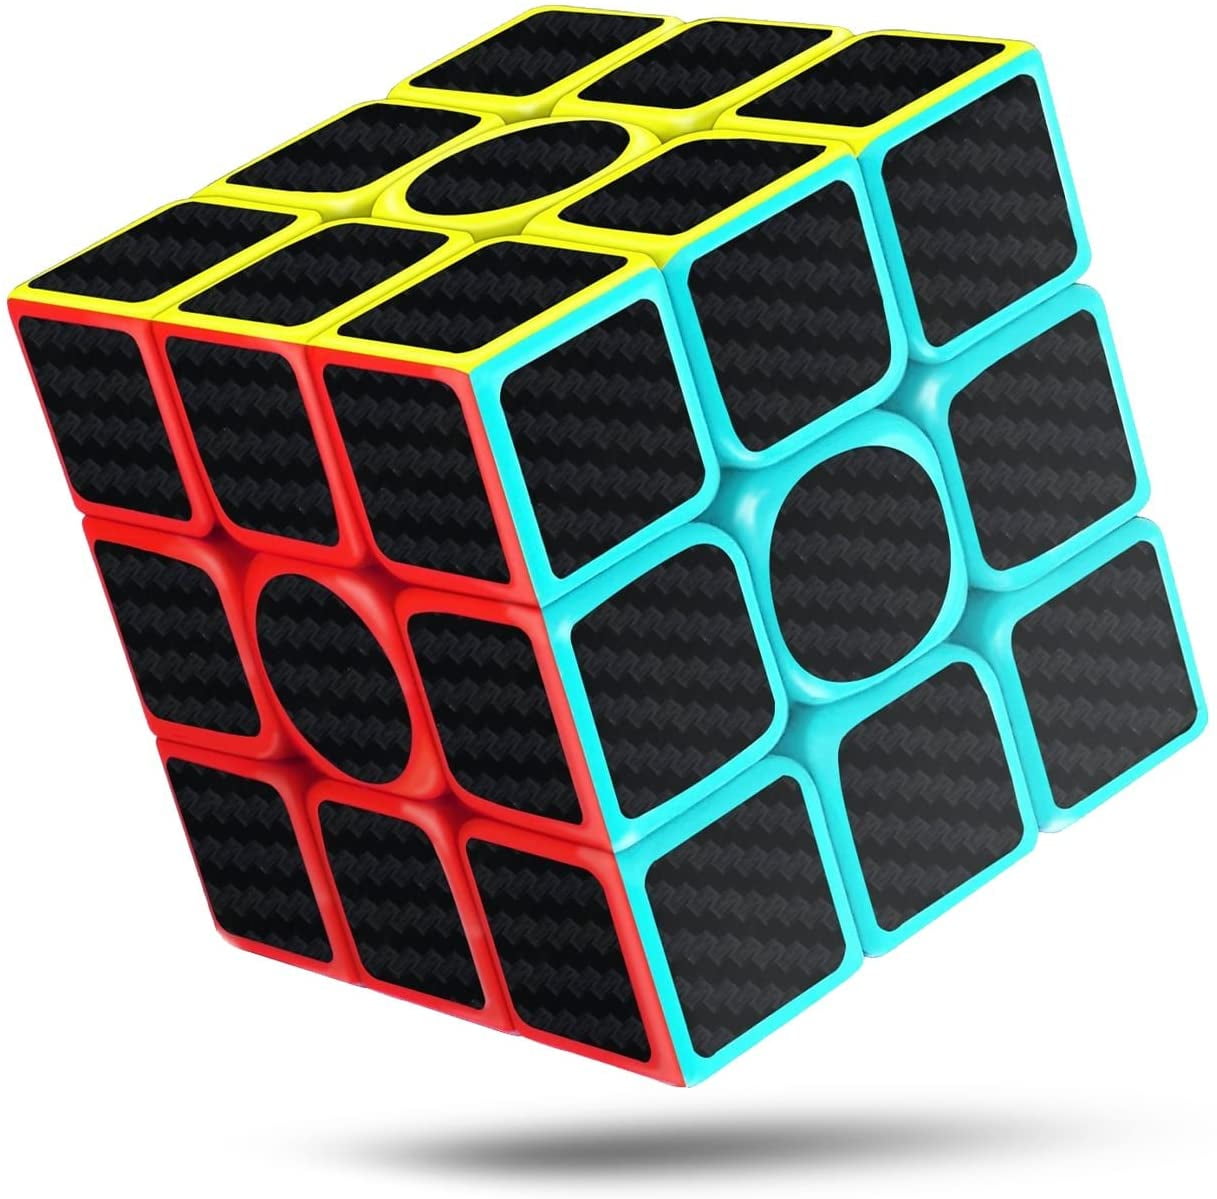 3x3x3 Magic Speed Cube Original Ultra-smooth Stickerless Puzzle Educational Toy 